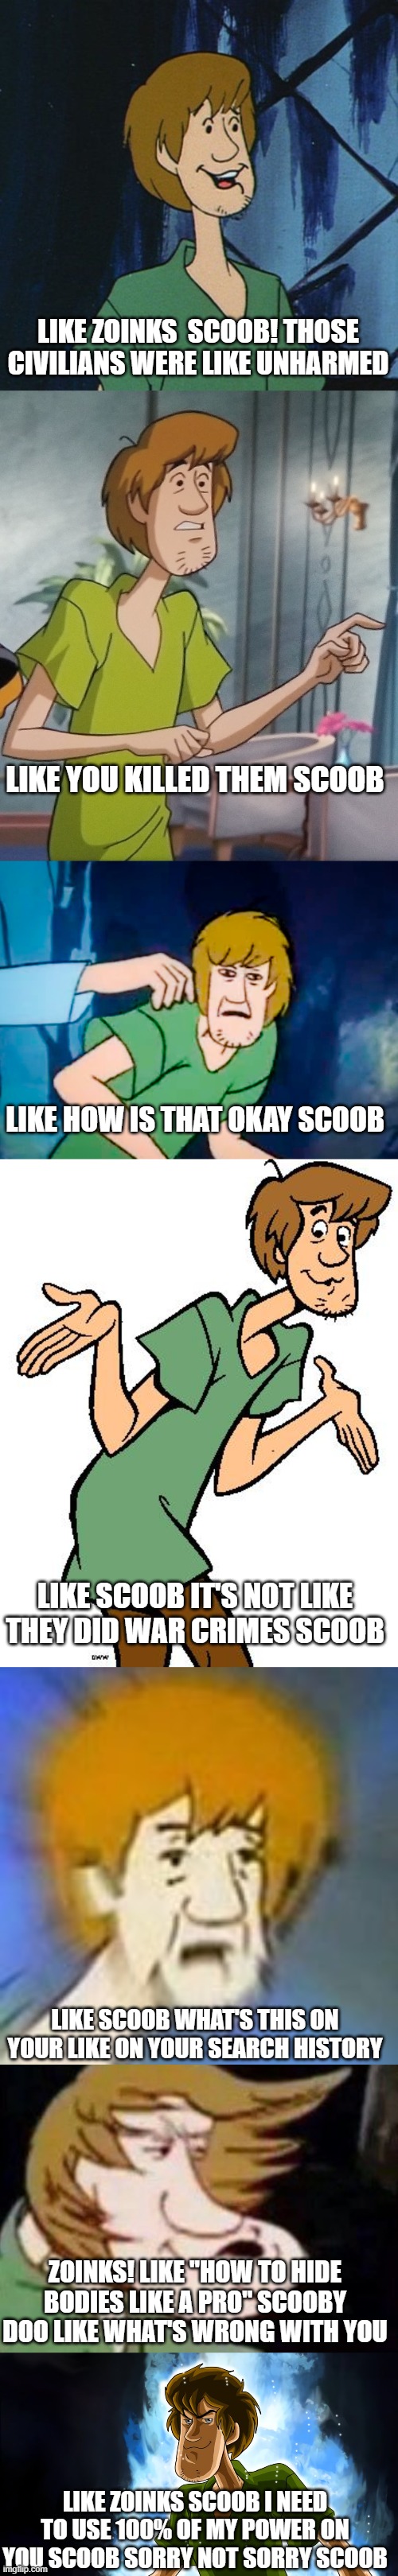 Shaggy is not okay with Scooby-Doo | LIKE ZOINKS  SCOOB! THOSE CIVILIANS WERE LIKE UNHARMED; LIKE YOU KILLED THEM SCOOB; LIKE HOW IS THAT OKAY SCOOB; LIKE SCOOB IT'S NOT LIKE THEY DID WAR CRIMES SCOOB; LIKE SCOOB WHAT'S THIS ON YOUR LIKE ON YOUR SEARCH HISTORY; ZOINKS! LIKE "HOW TO HIDE BODIES LIKE A PRO" SCOOBY DOO LIKE WHAT'S WRONG WITH YOU; LIKE ZOINKS SCOOB I NEED TO USE 100% OF MY POWER ON YOU SCOOB SORRY NOT SORRY SCOOB | image tagged in cartoon shaggy 2,shaggy and scooby concerned,shaggy meme,shaggy from scooby doo,shaggy dank meme,dank shaggy | made w/ Imgflip meme maker